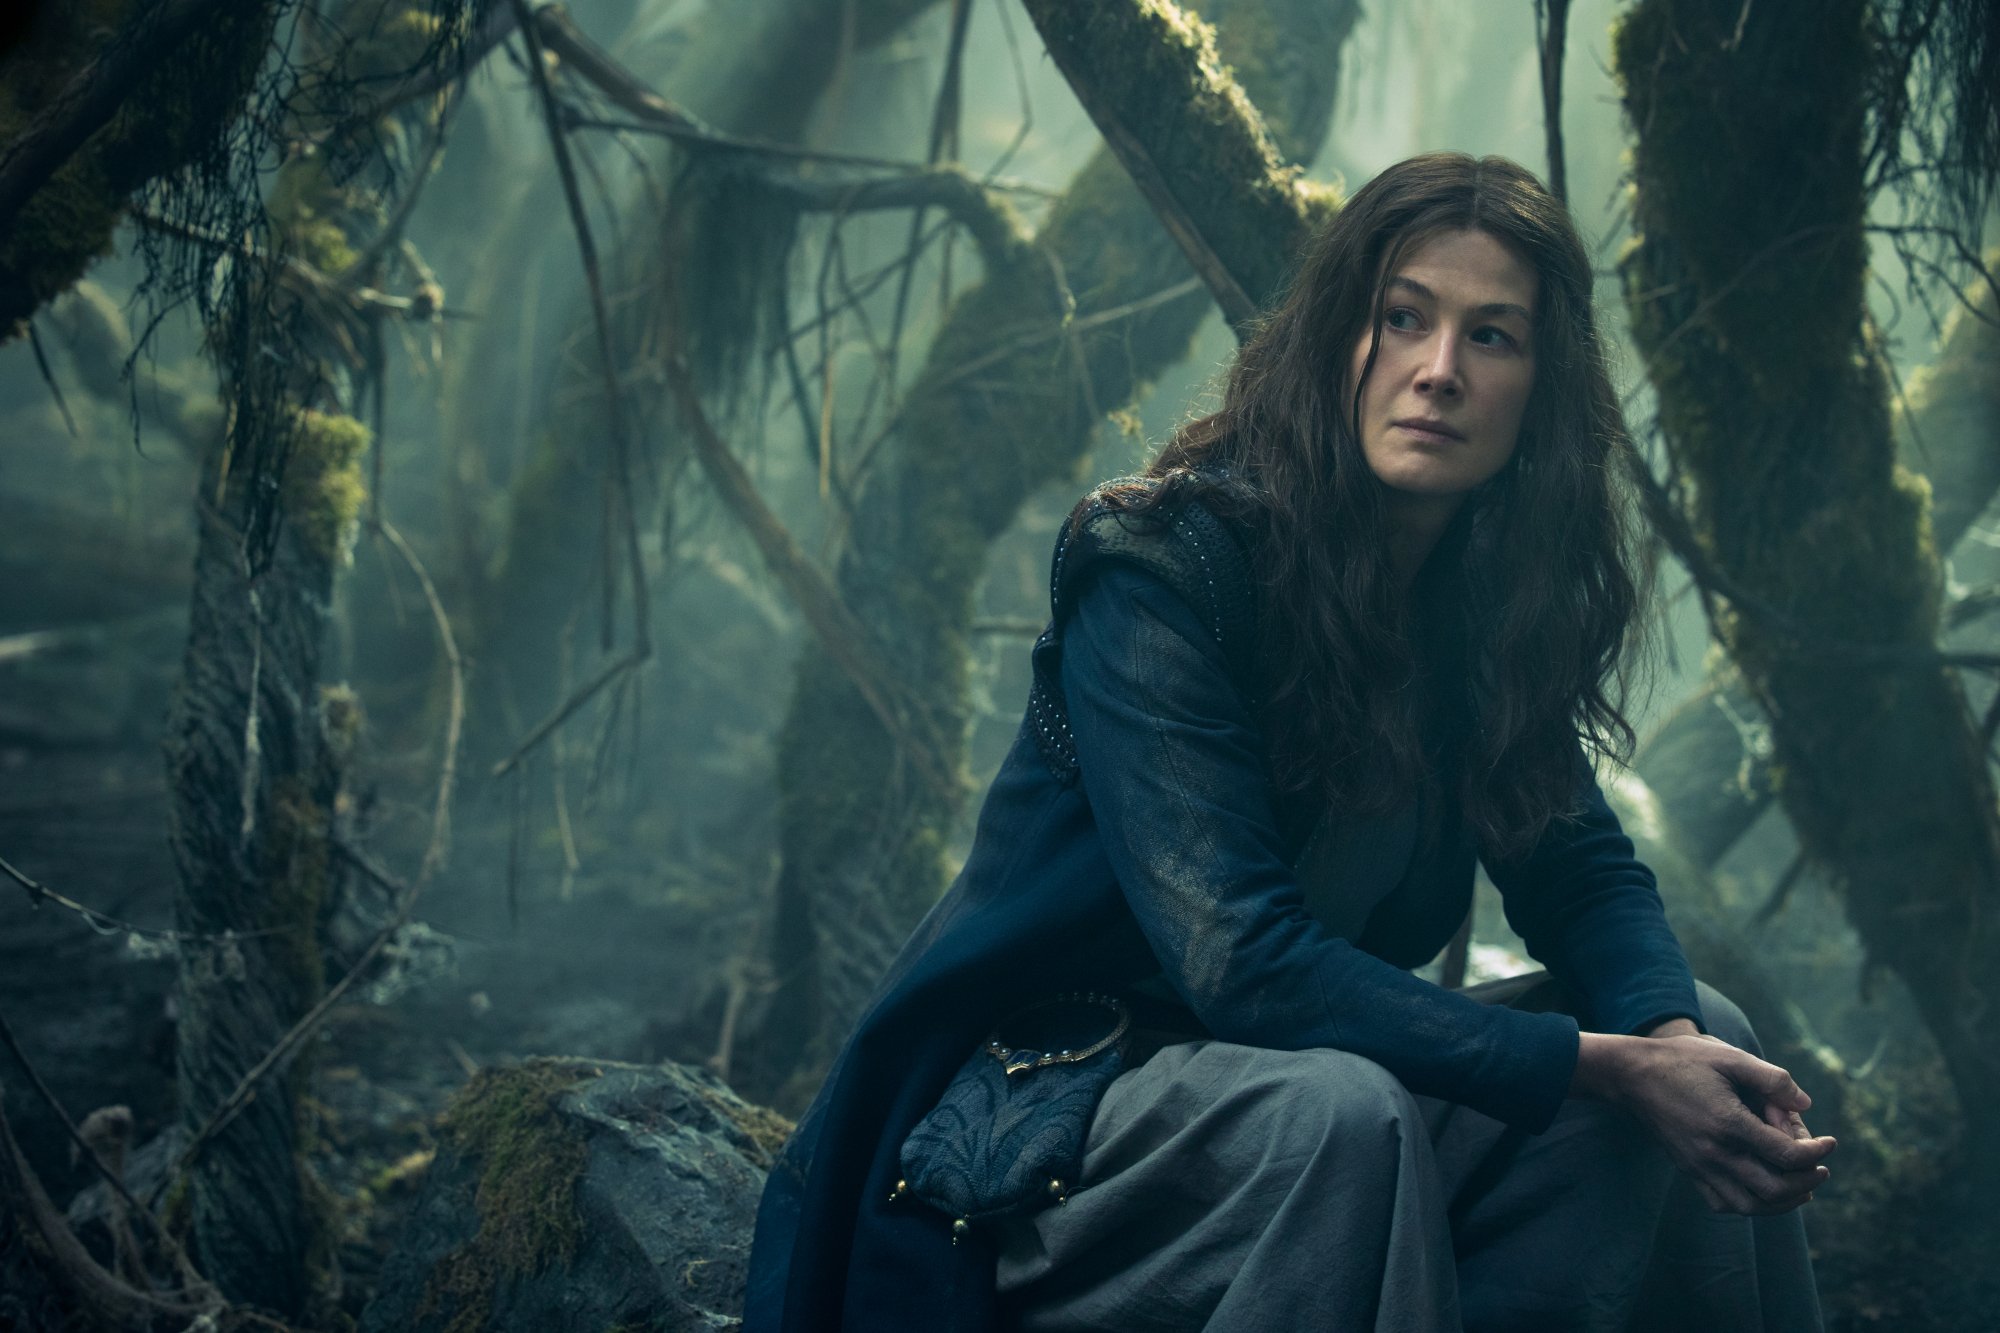 Rosamund Pike as Moiraine Damodred in 'The Wheel of Time' TV series. She's kneeling in a dark wood and looking at something off-screen.